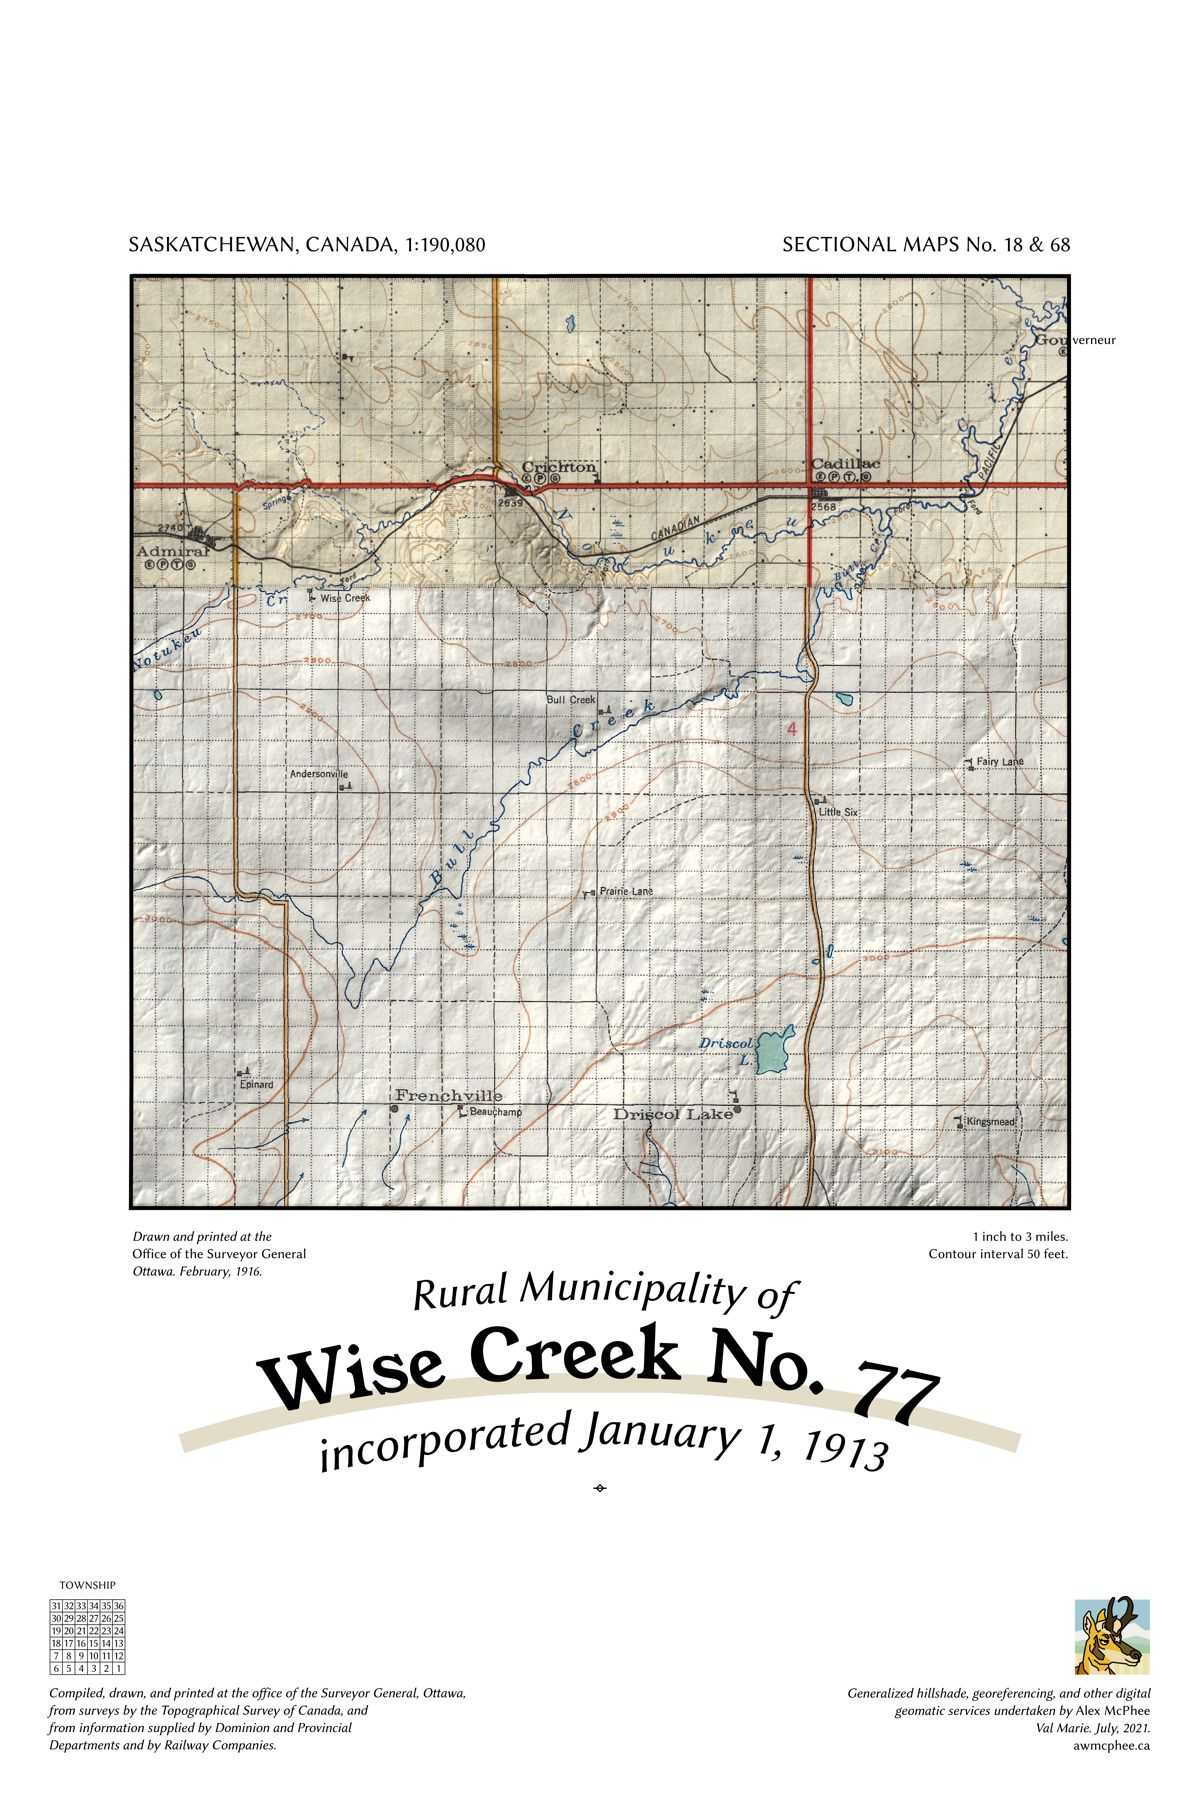 A map of the Rural Municipality of Wise Creek No. 77.